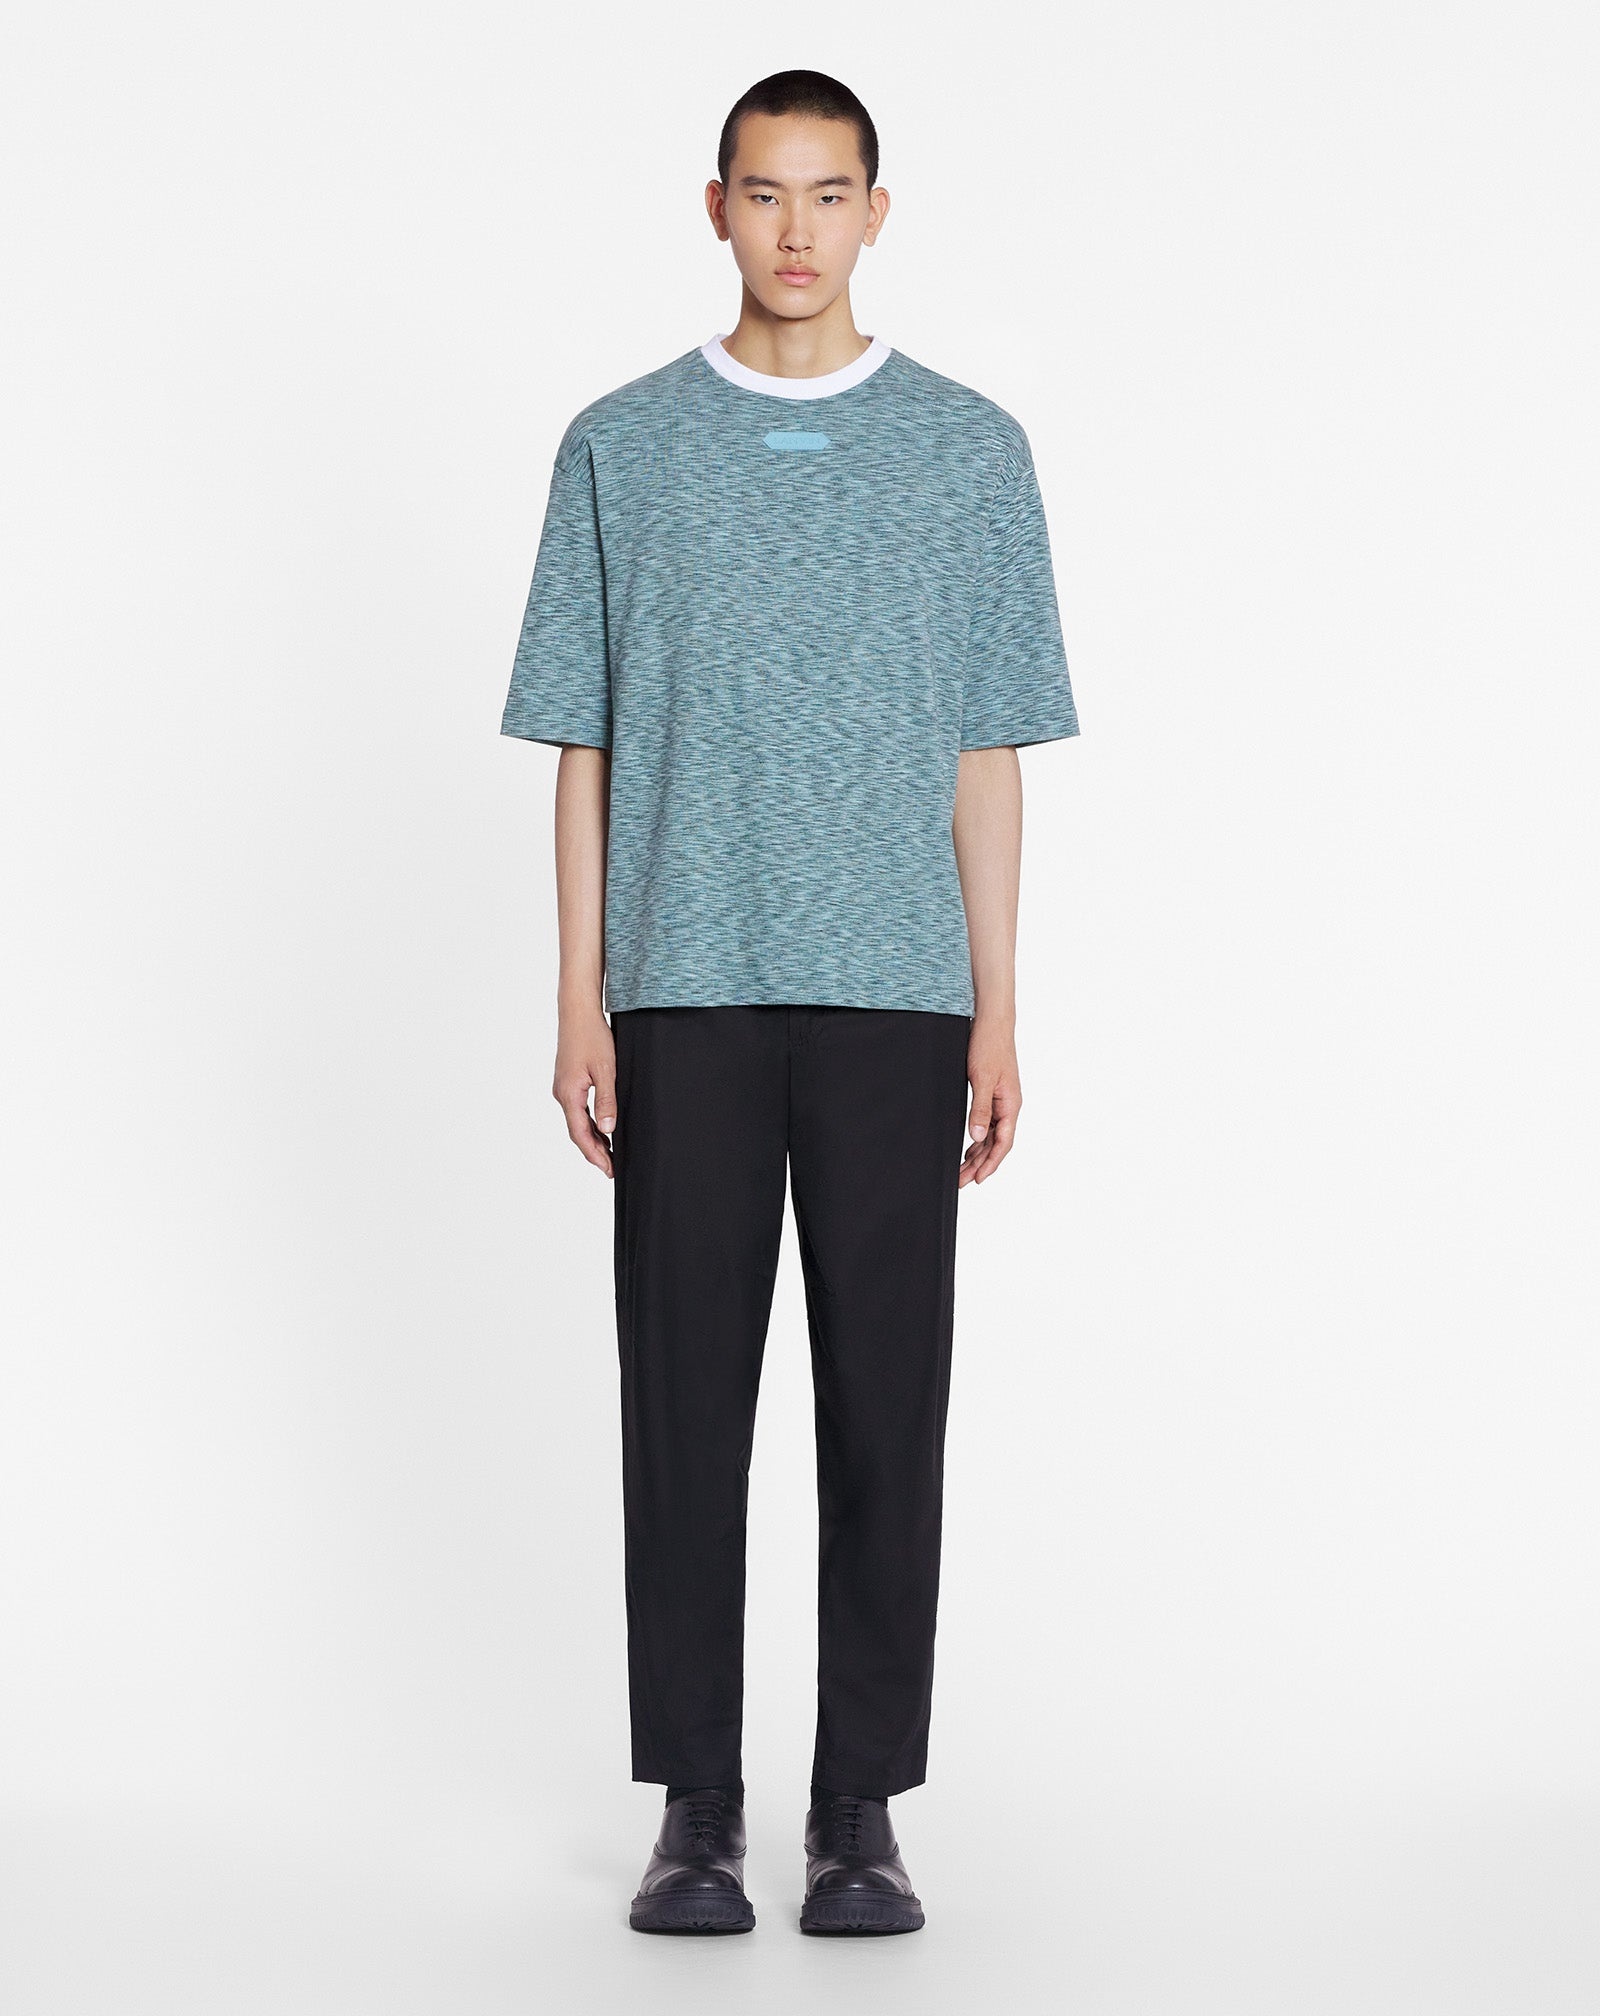 HEATHERED-EFFECT LOOSE-FITTING T-SHIRT - 2